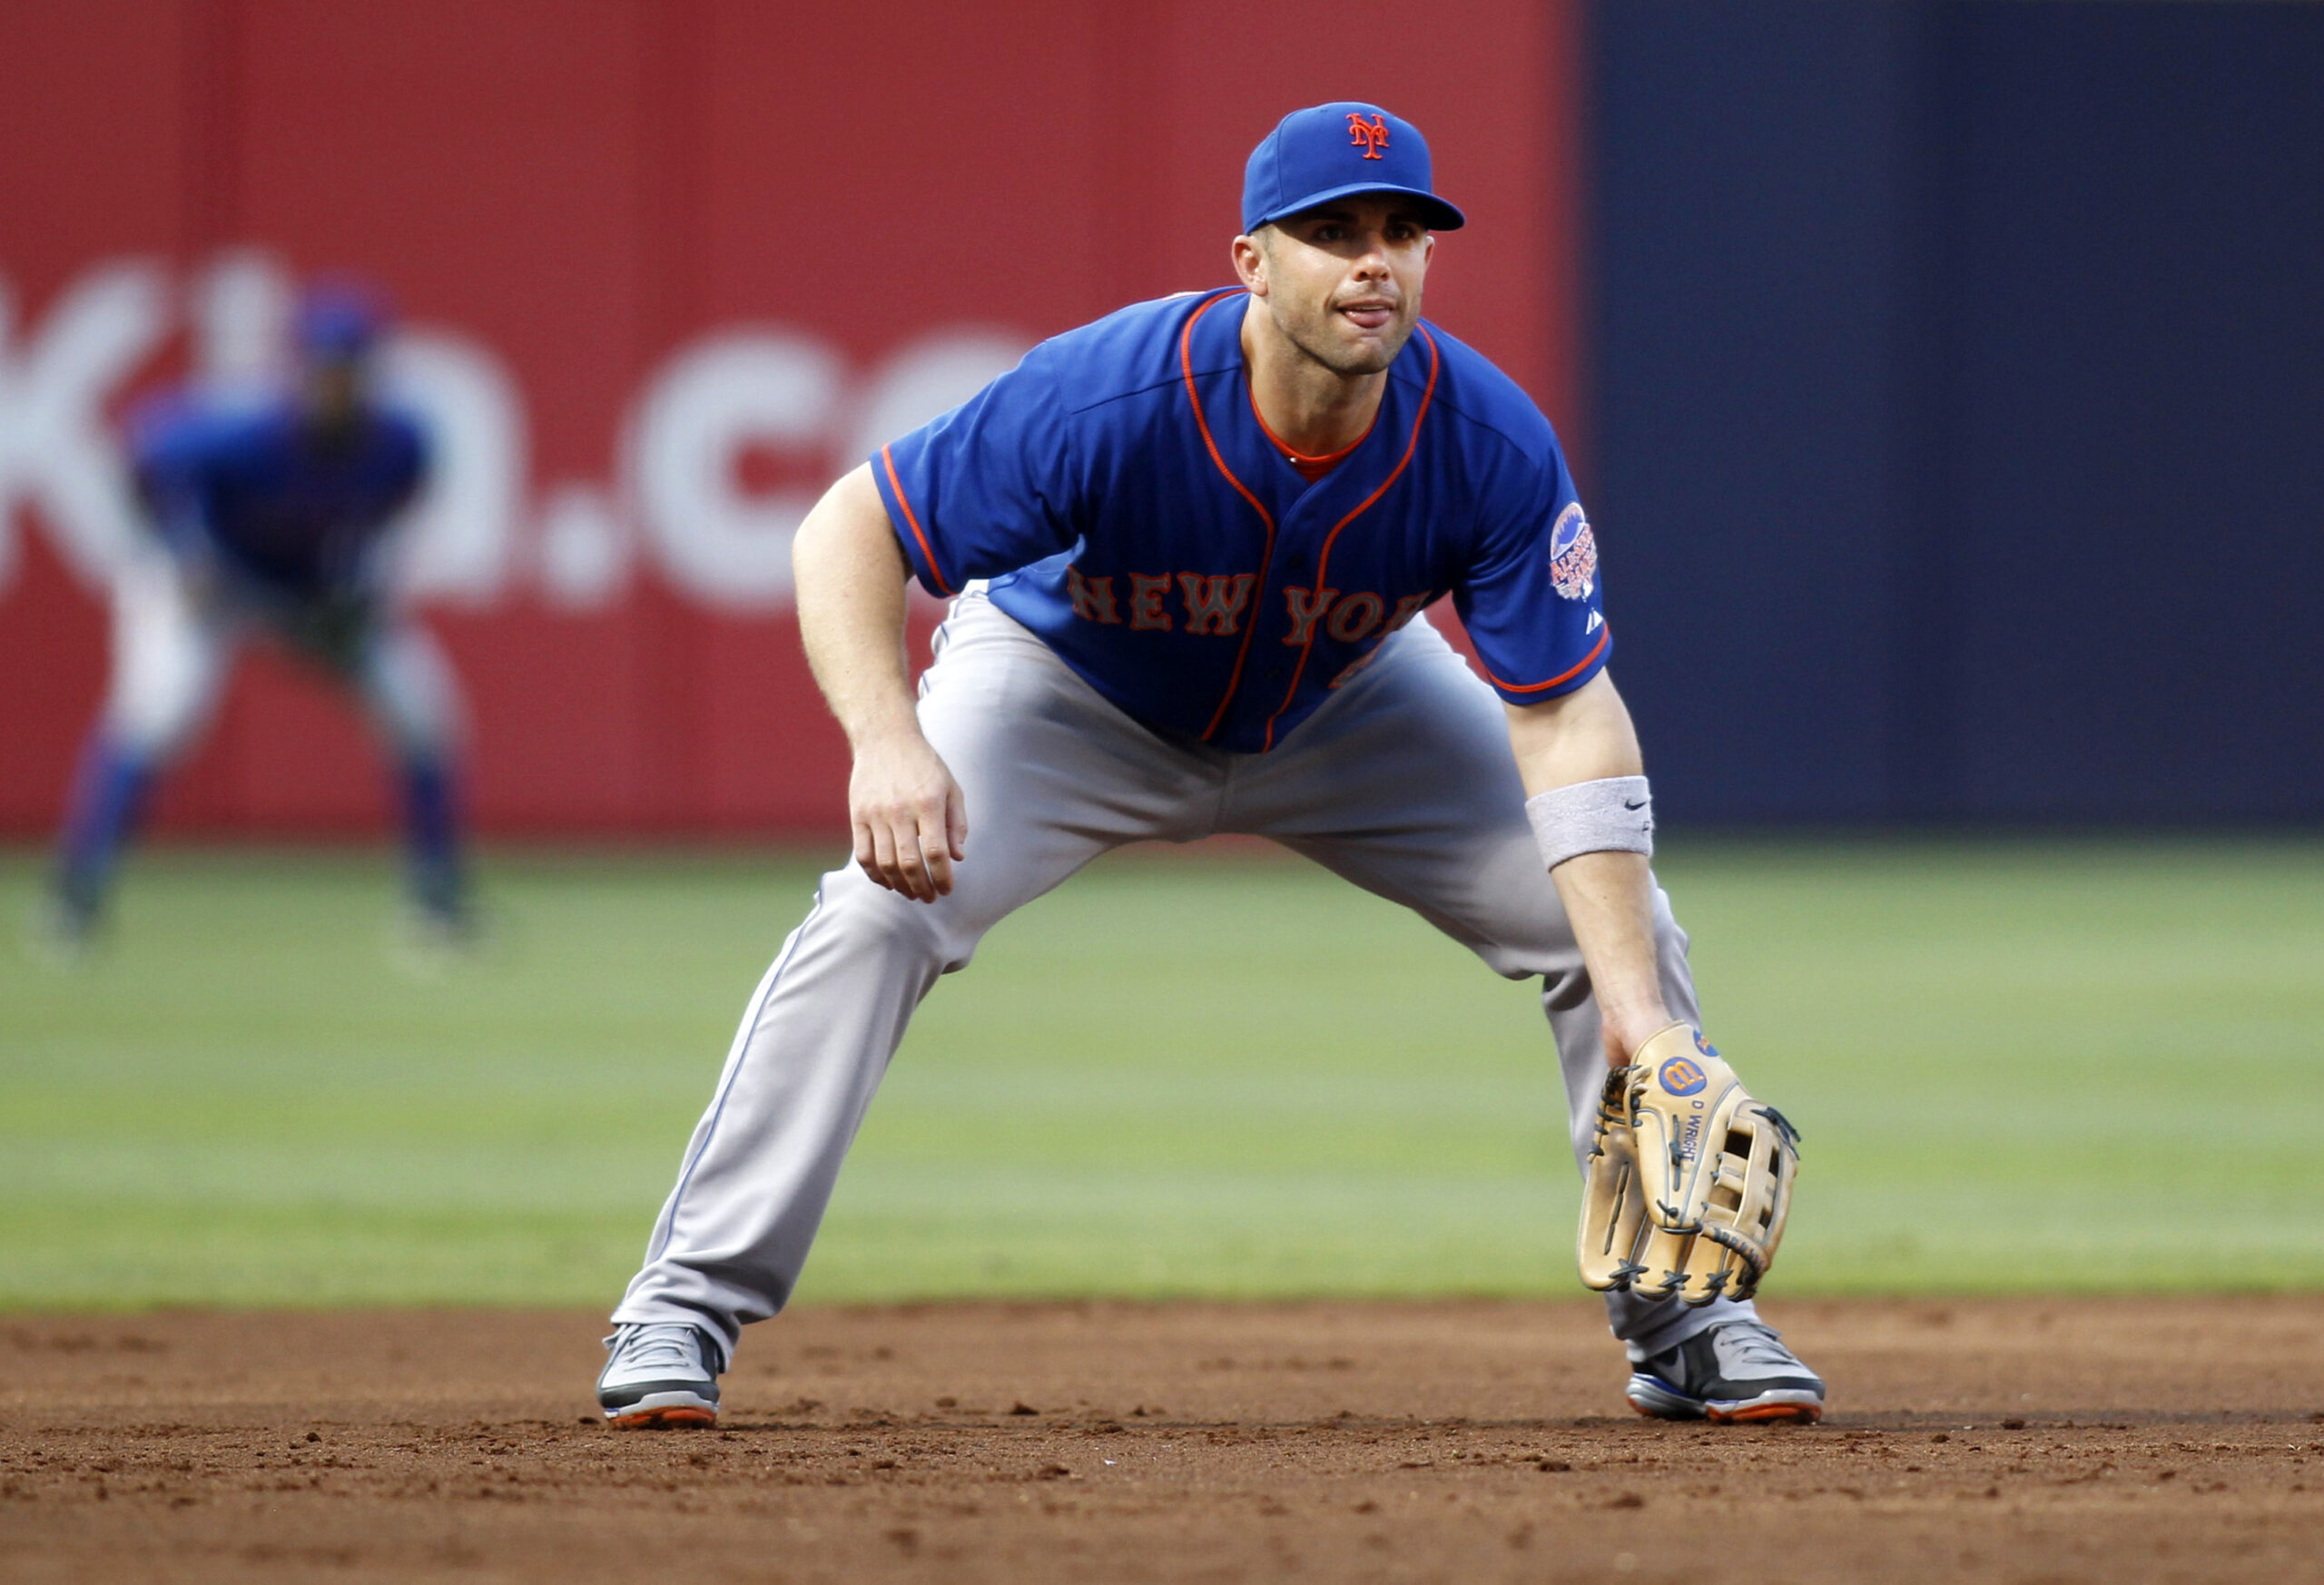 Wright's Gold Glove Defense Begins With His Glove - Metsmerized Online